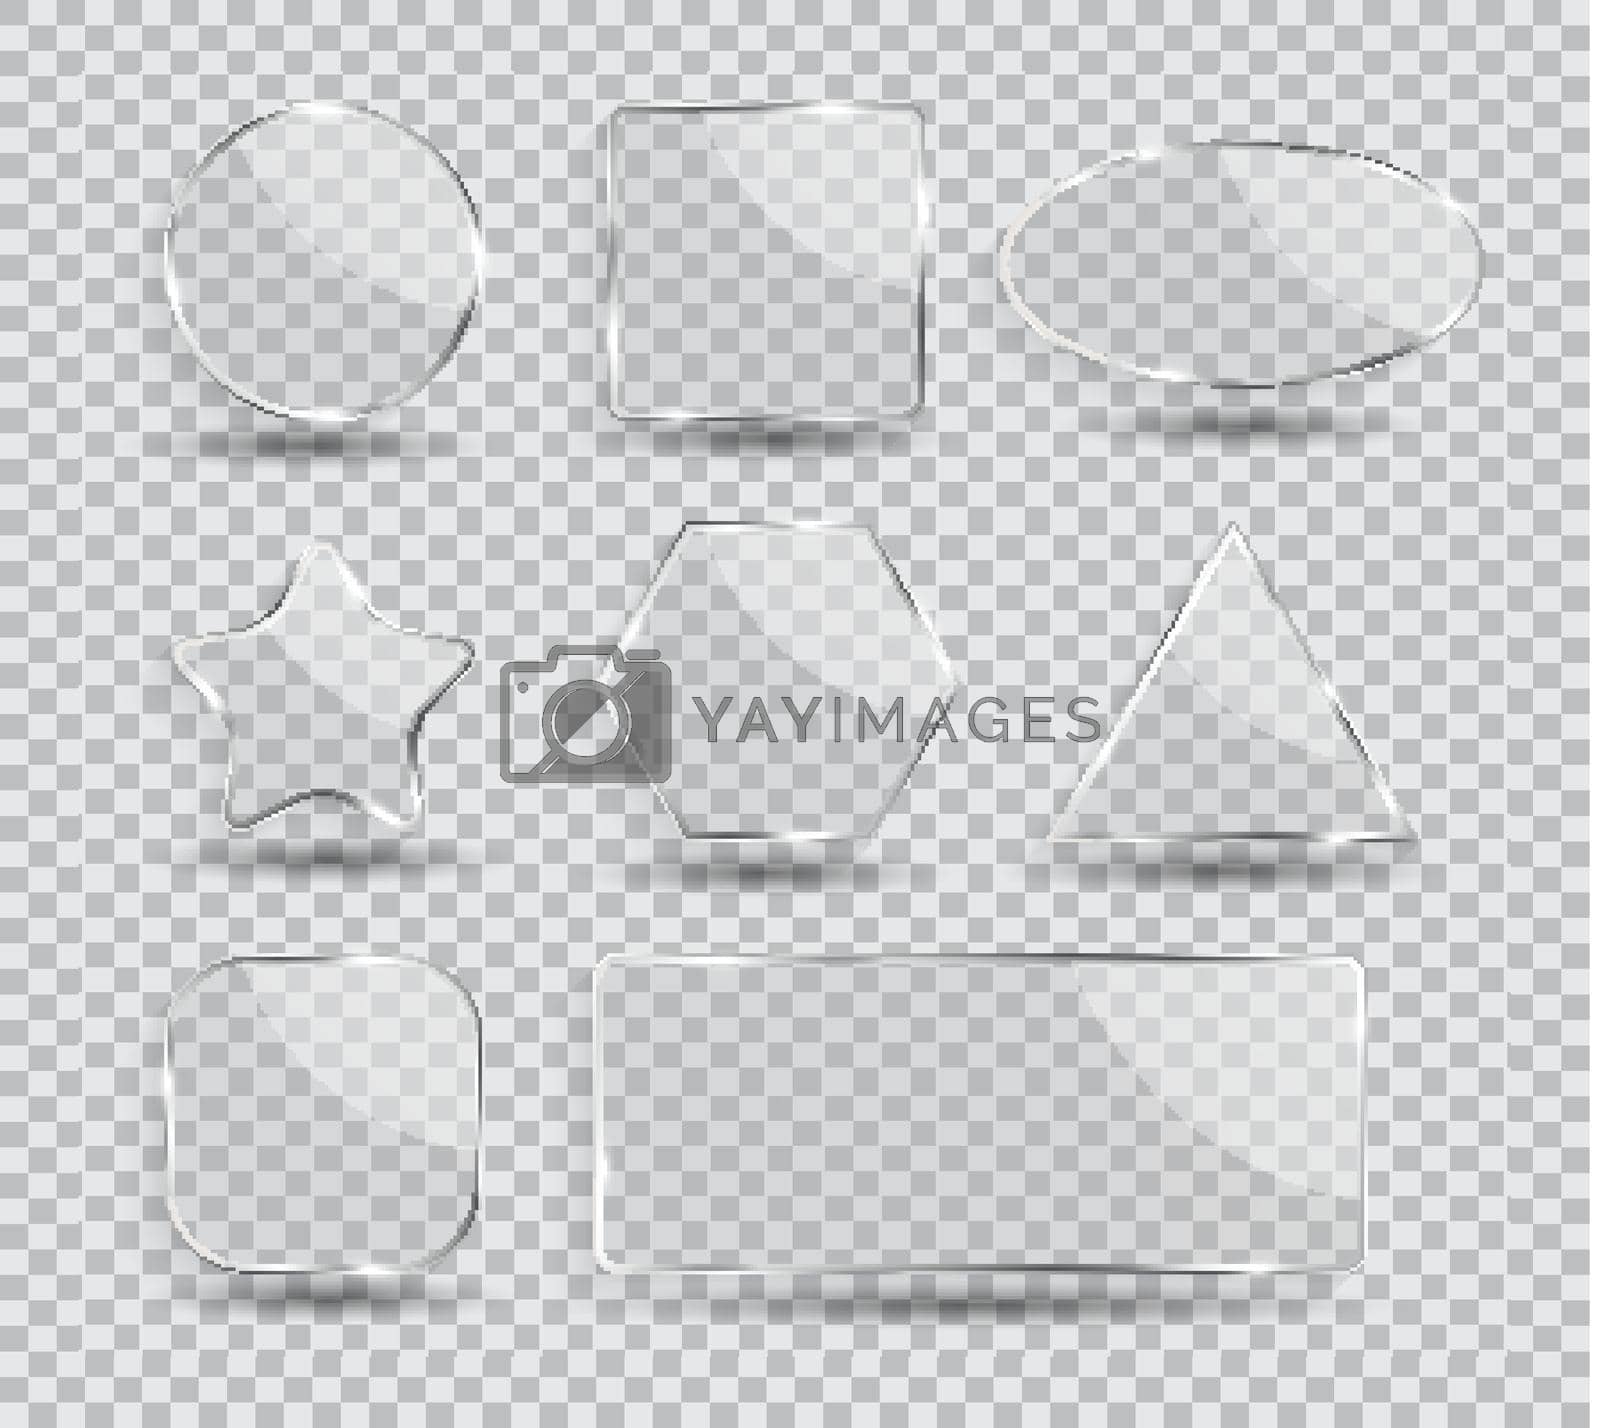 Royalty free image of Glass Transparency Frame Collection Set  Vector Illustration by yganko